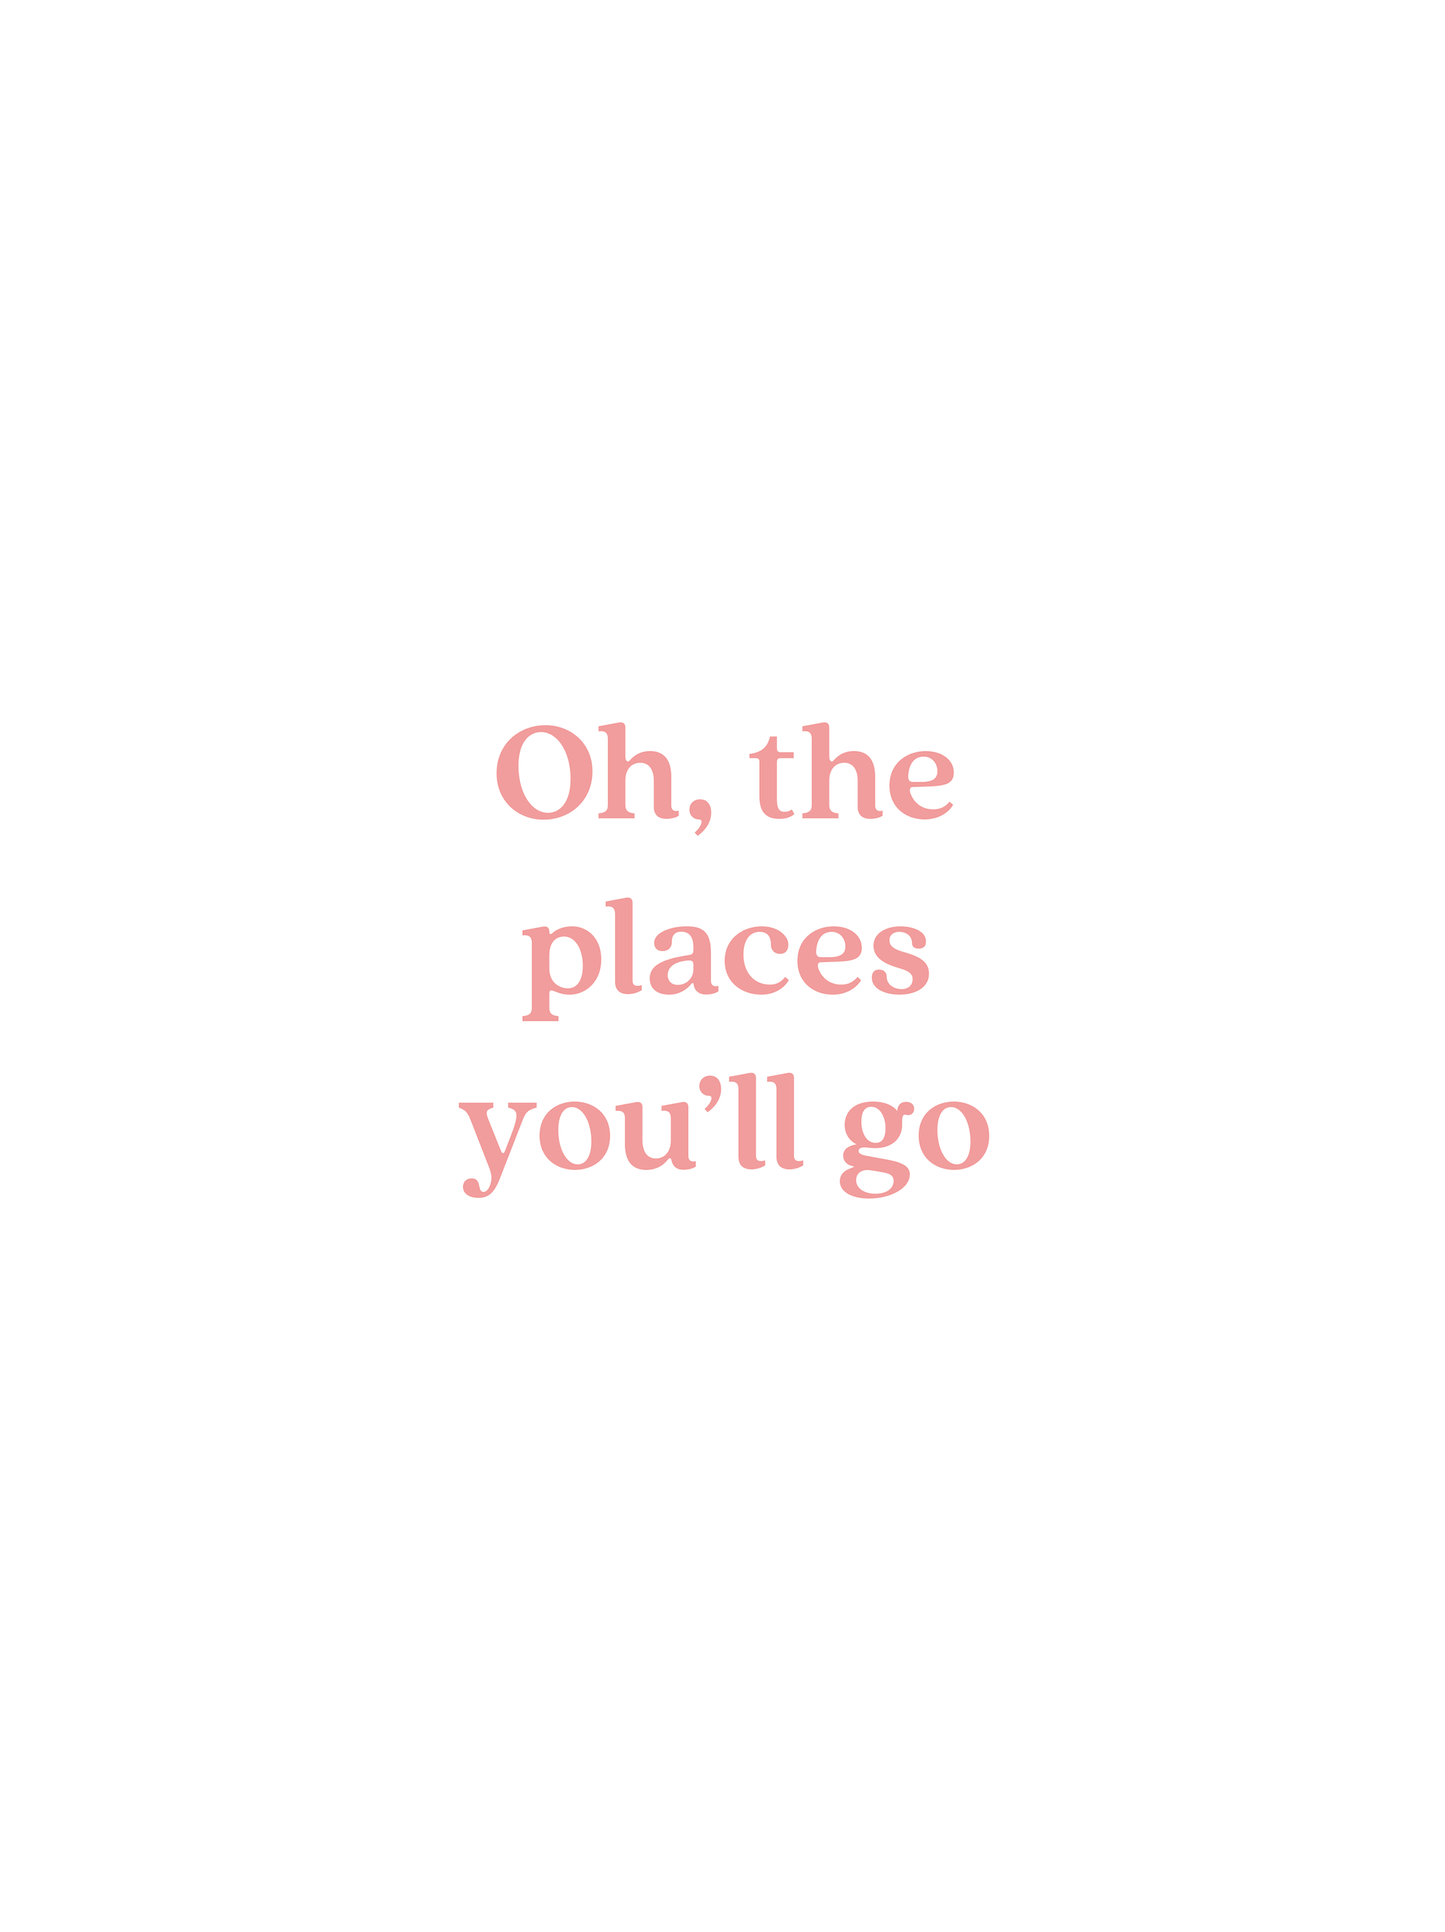 OH,THE PLACES YOU'LL GO POSTER – PINK